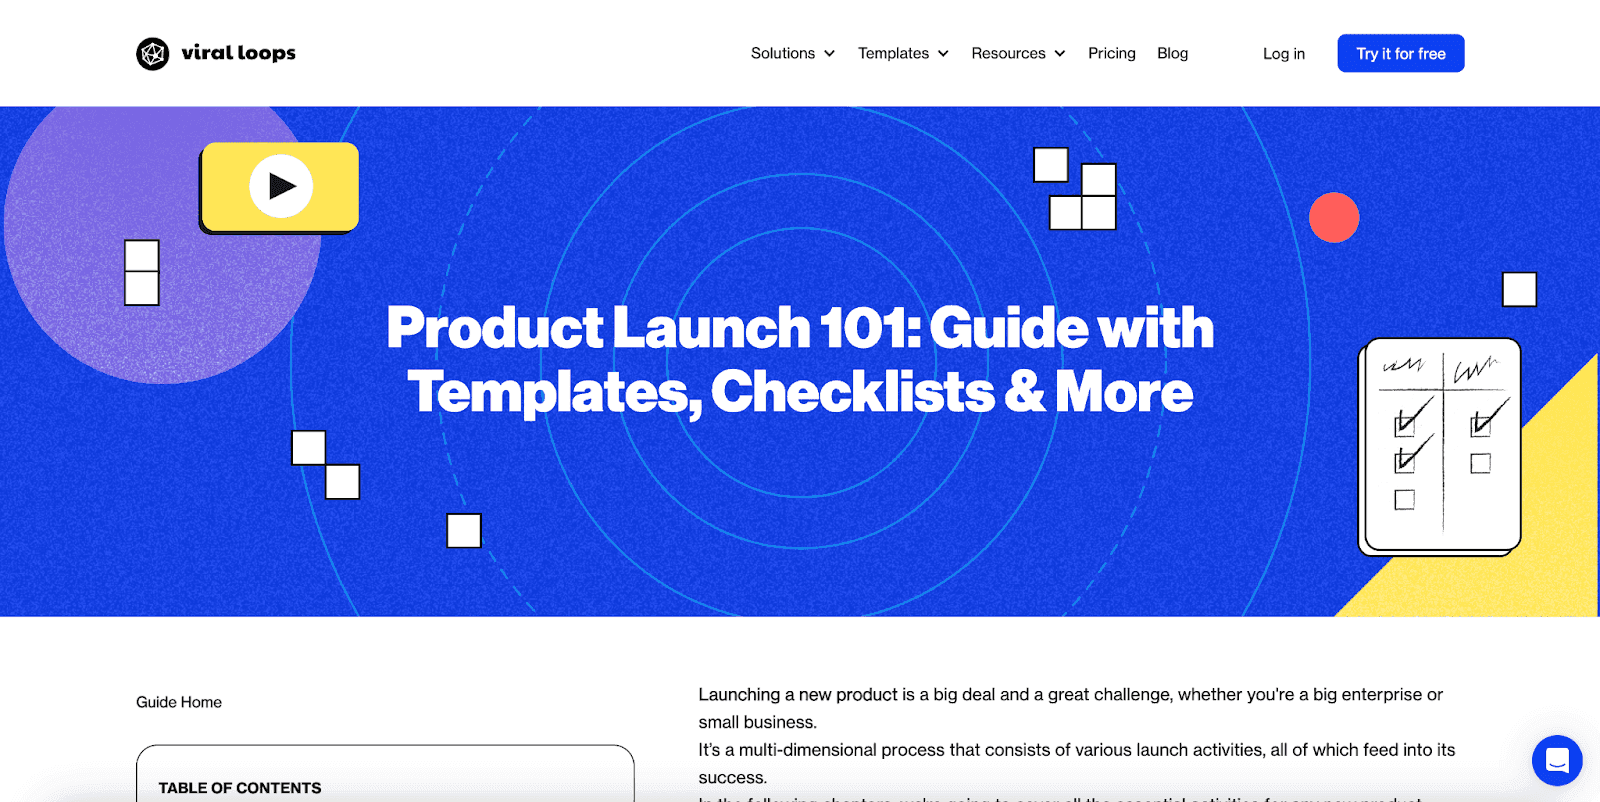 Viral loops product launch 101 guide